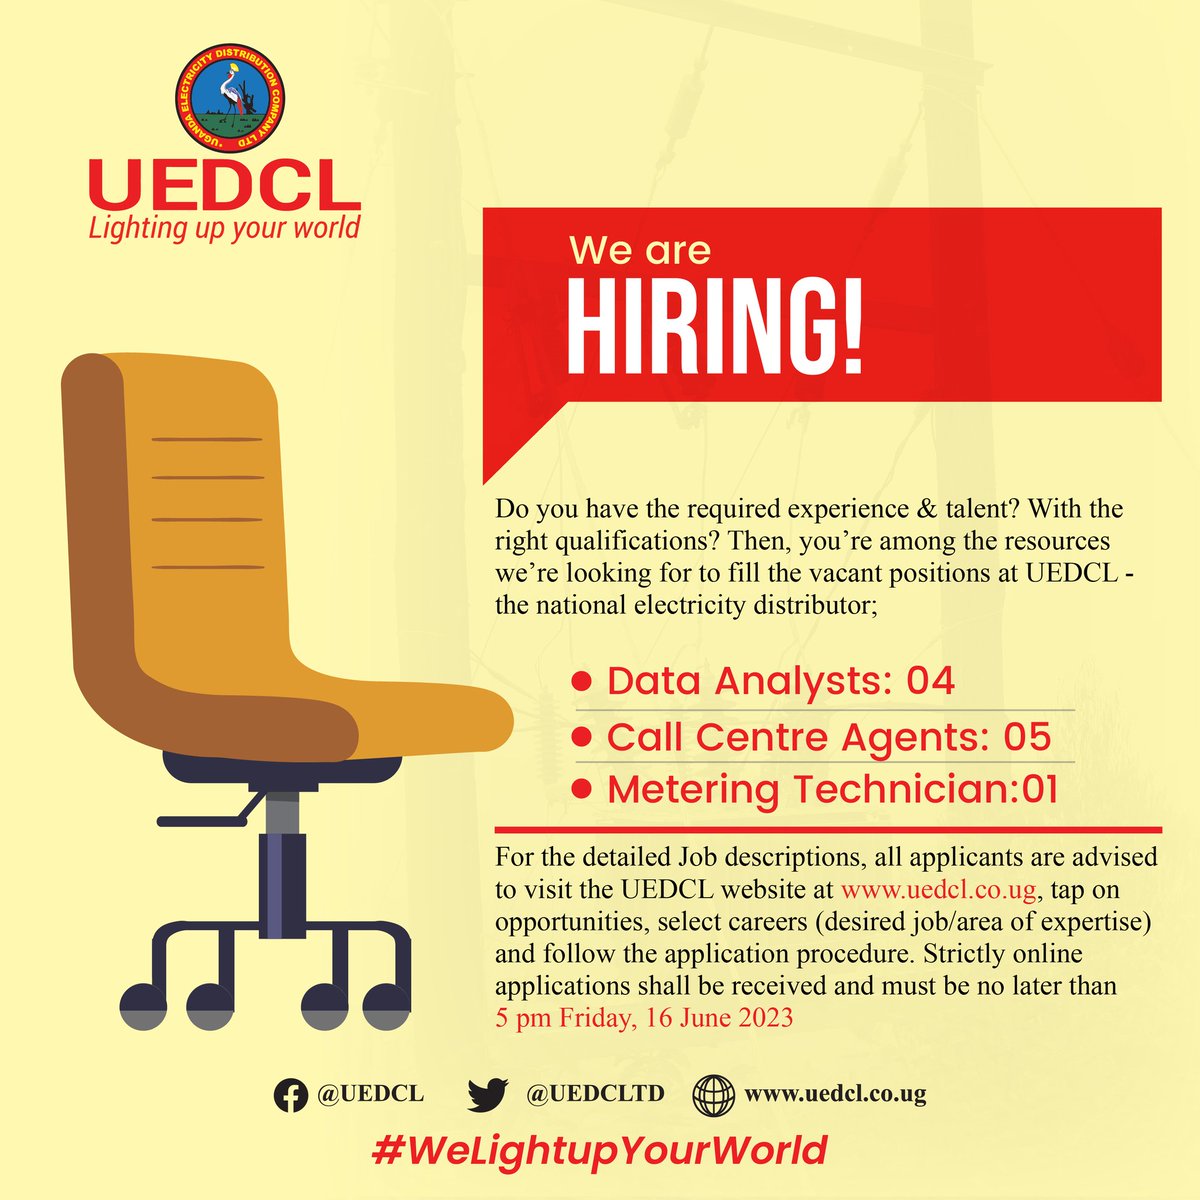 #UEDCLUpdate: Applicants, if you are still facing some trouble accessing the #CareersPage, Pliz use this UEDCLHR link:uedclrecruit.exam.ug/index.php. Open up an account, and proceed with feeding in the required documents. The #JDs can as well be accessed there. Each upload, Max 1MB. JK